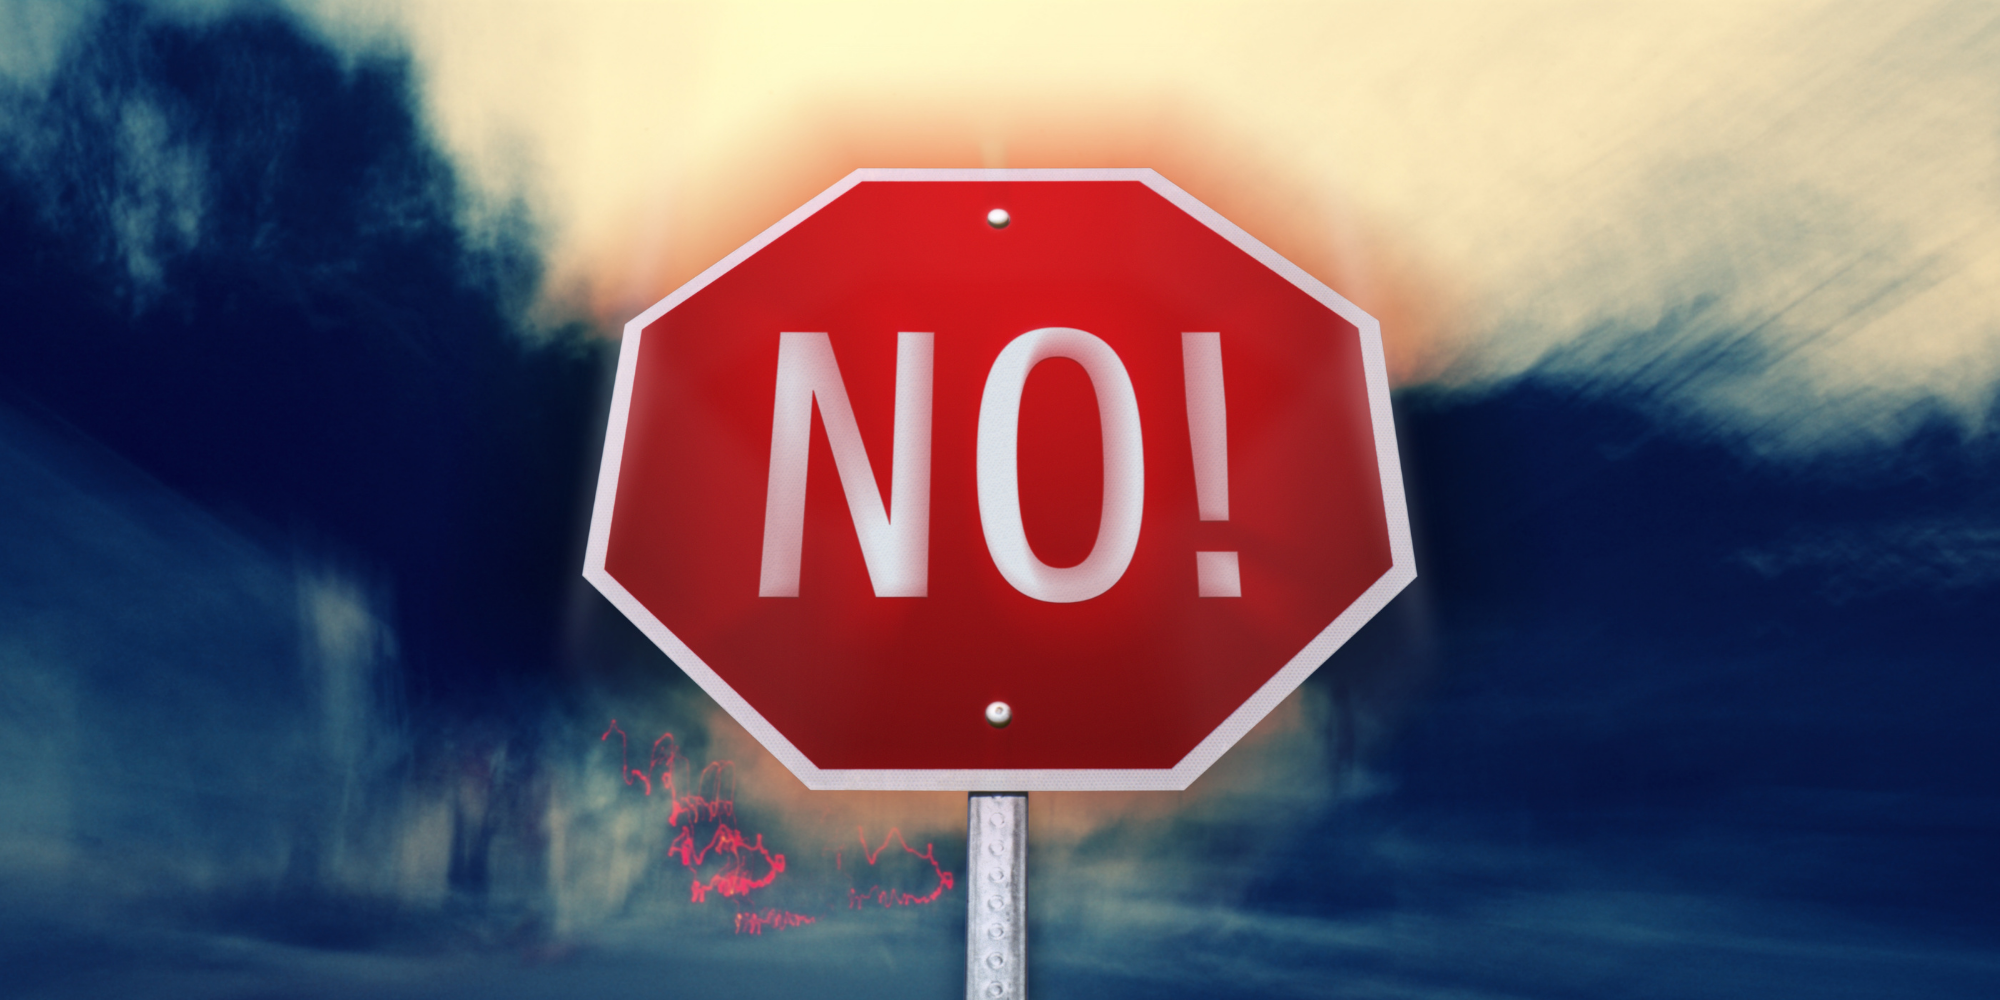 Learn the power of saying “No!” to ensure you win and succeed